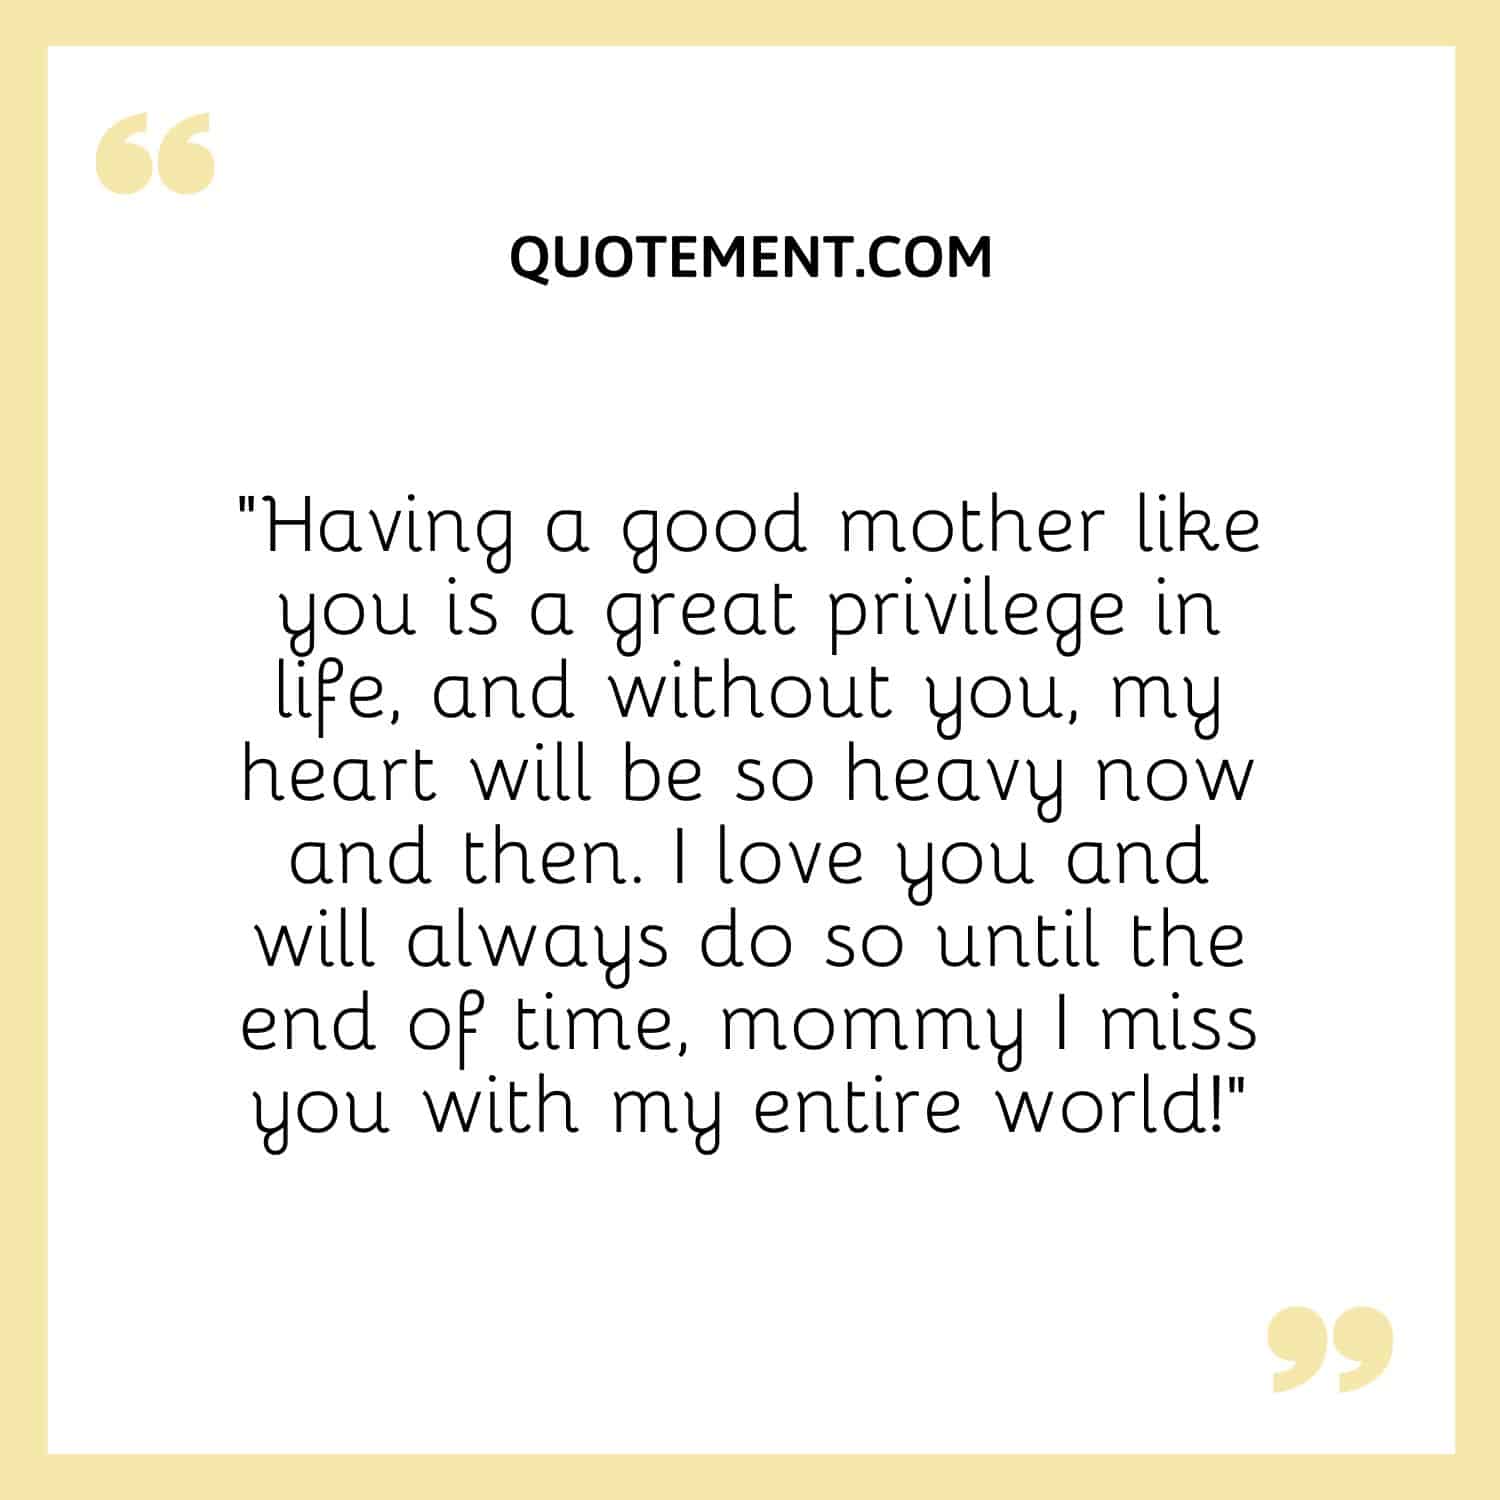 Having a good mother like you is a great privilege in life